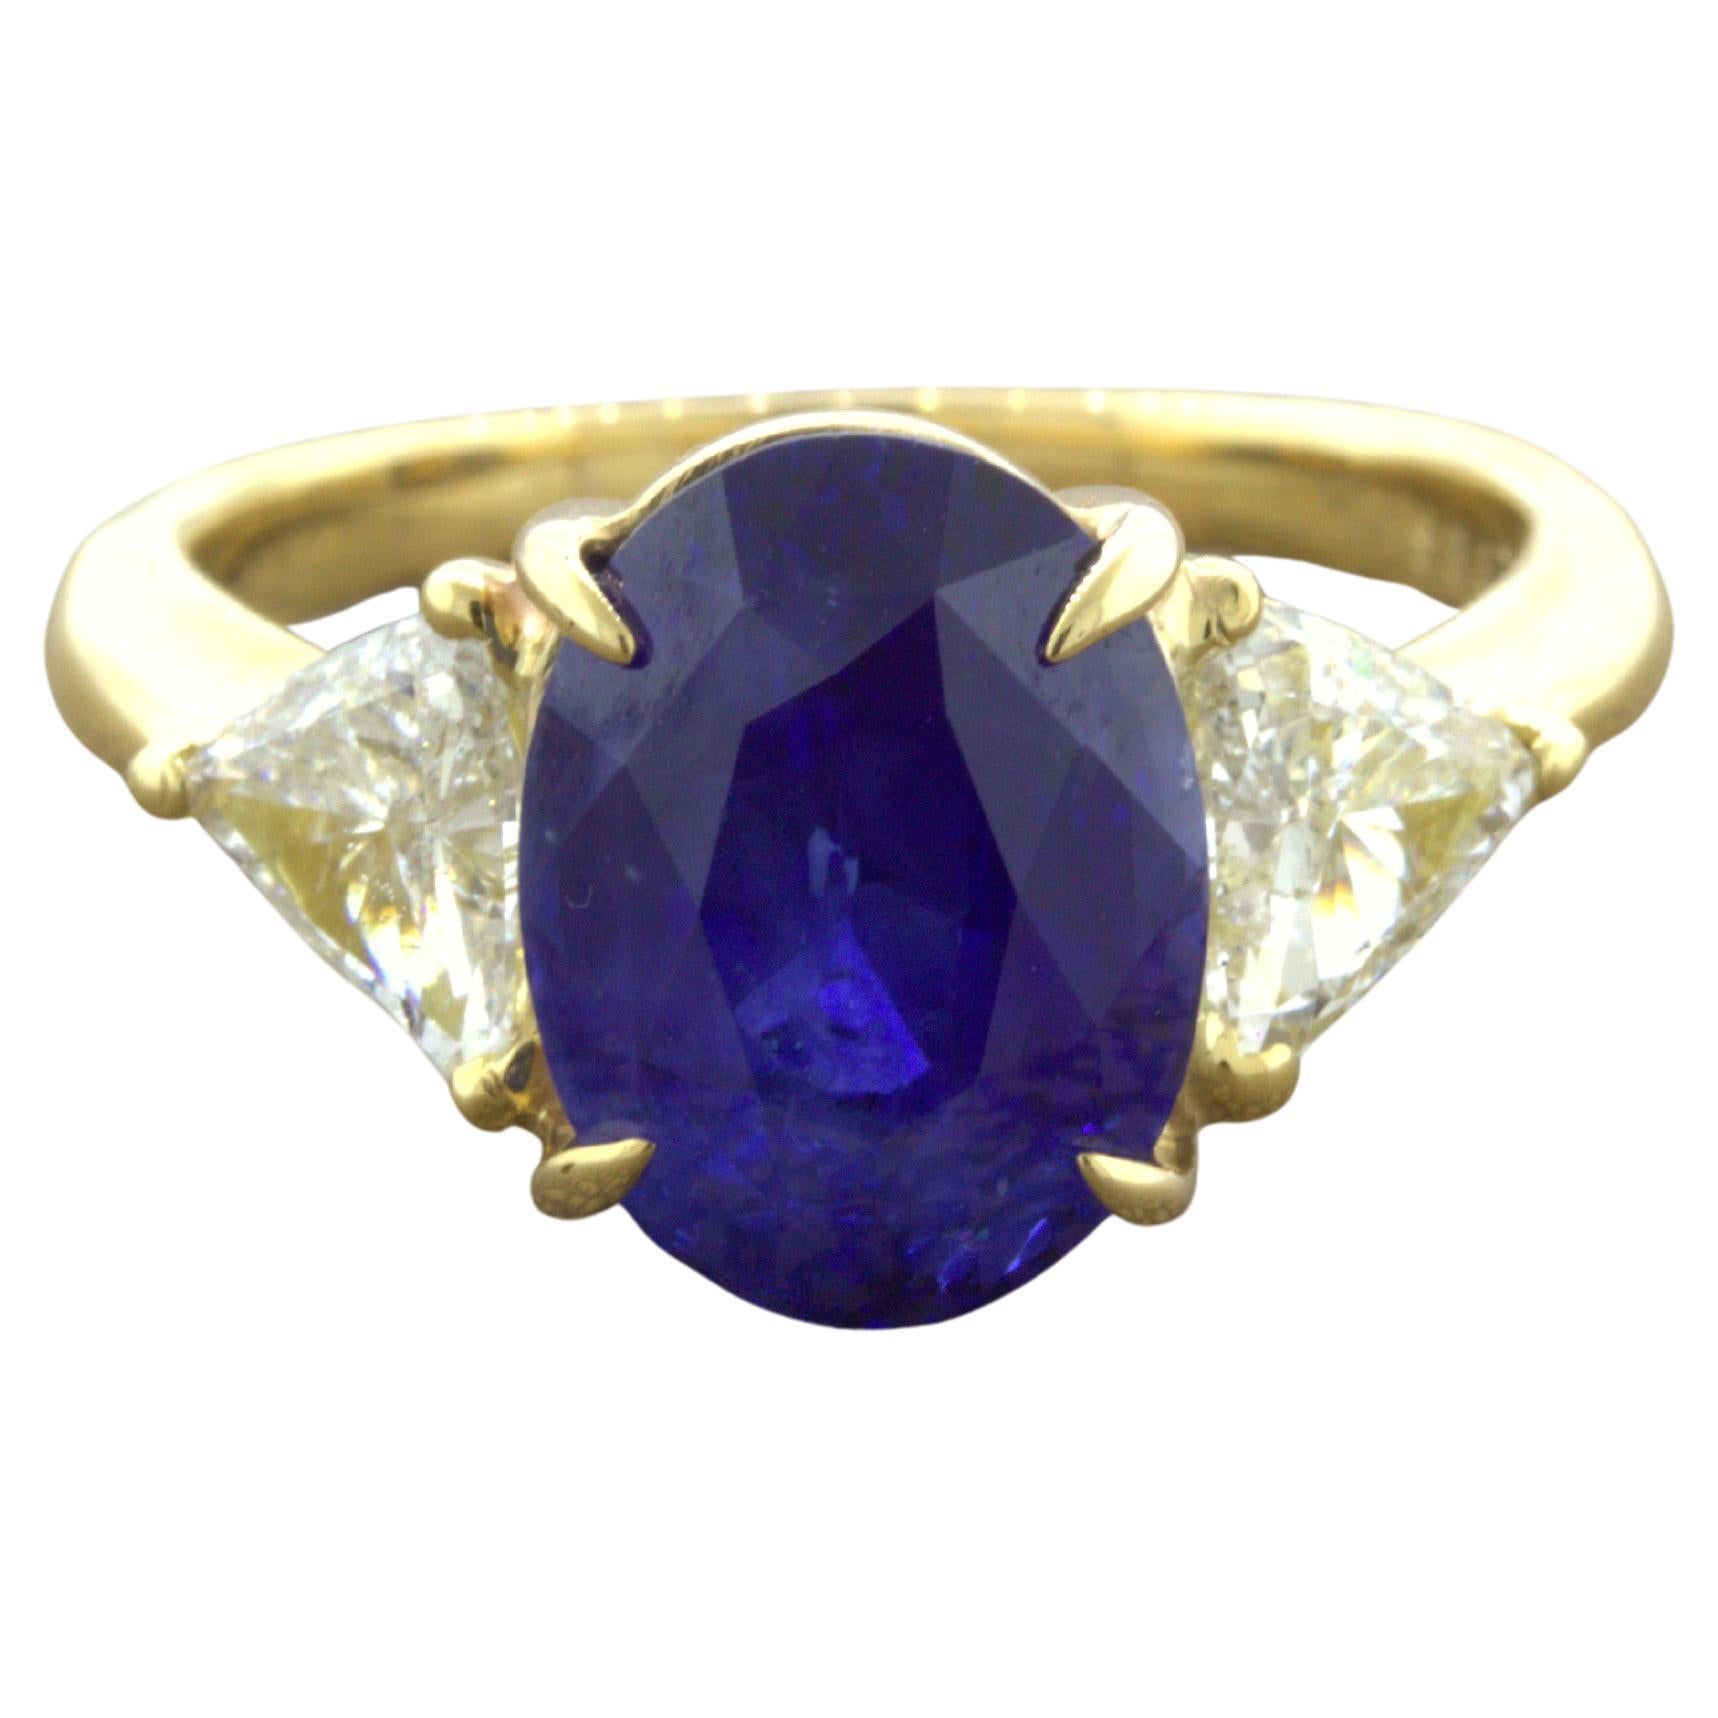 5.87 Carat Blue Sapphire Diamond 18k Yellow Gold 3-Stone Ring, GIA Certified For Sale